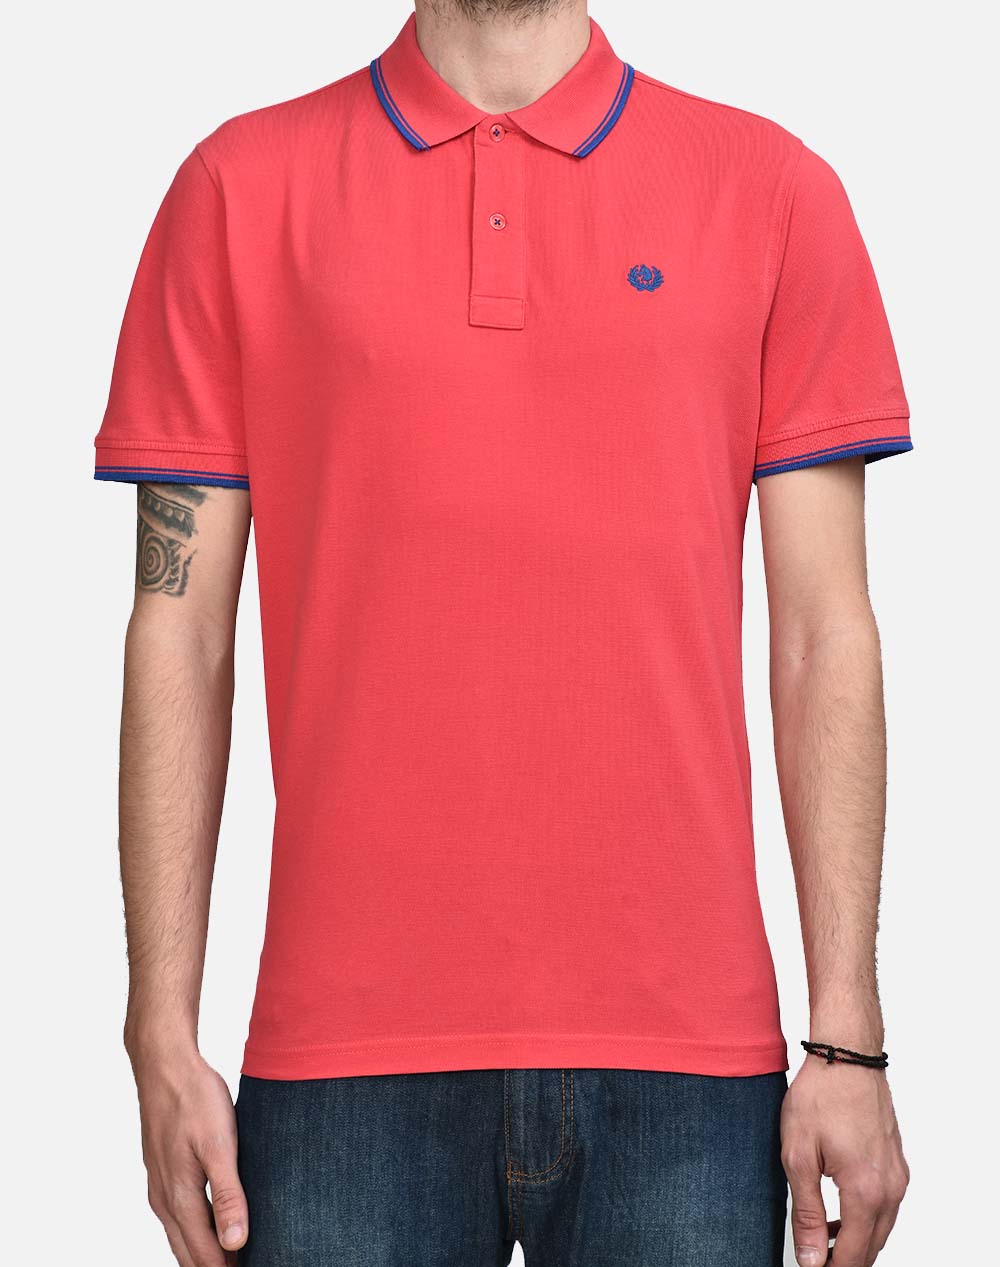 ASCOT ΜΠΛΟΥΖΑ POLO 15388360-43 Red 3420AASCO3410054_XR07533